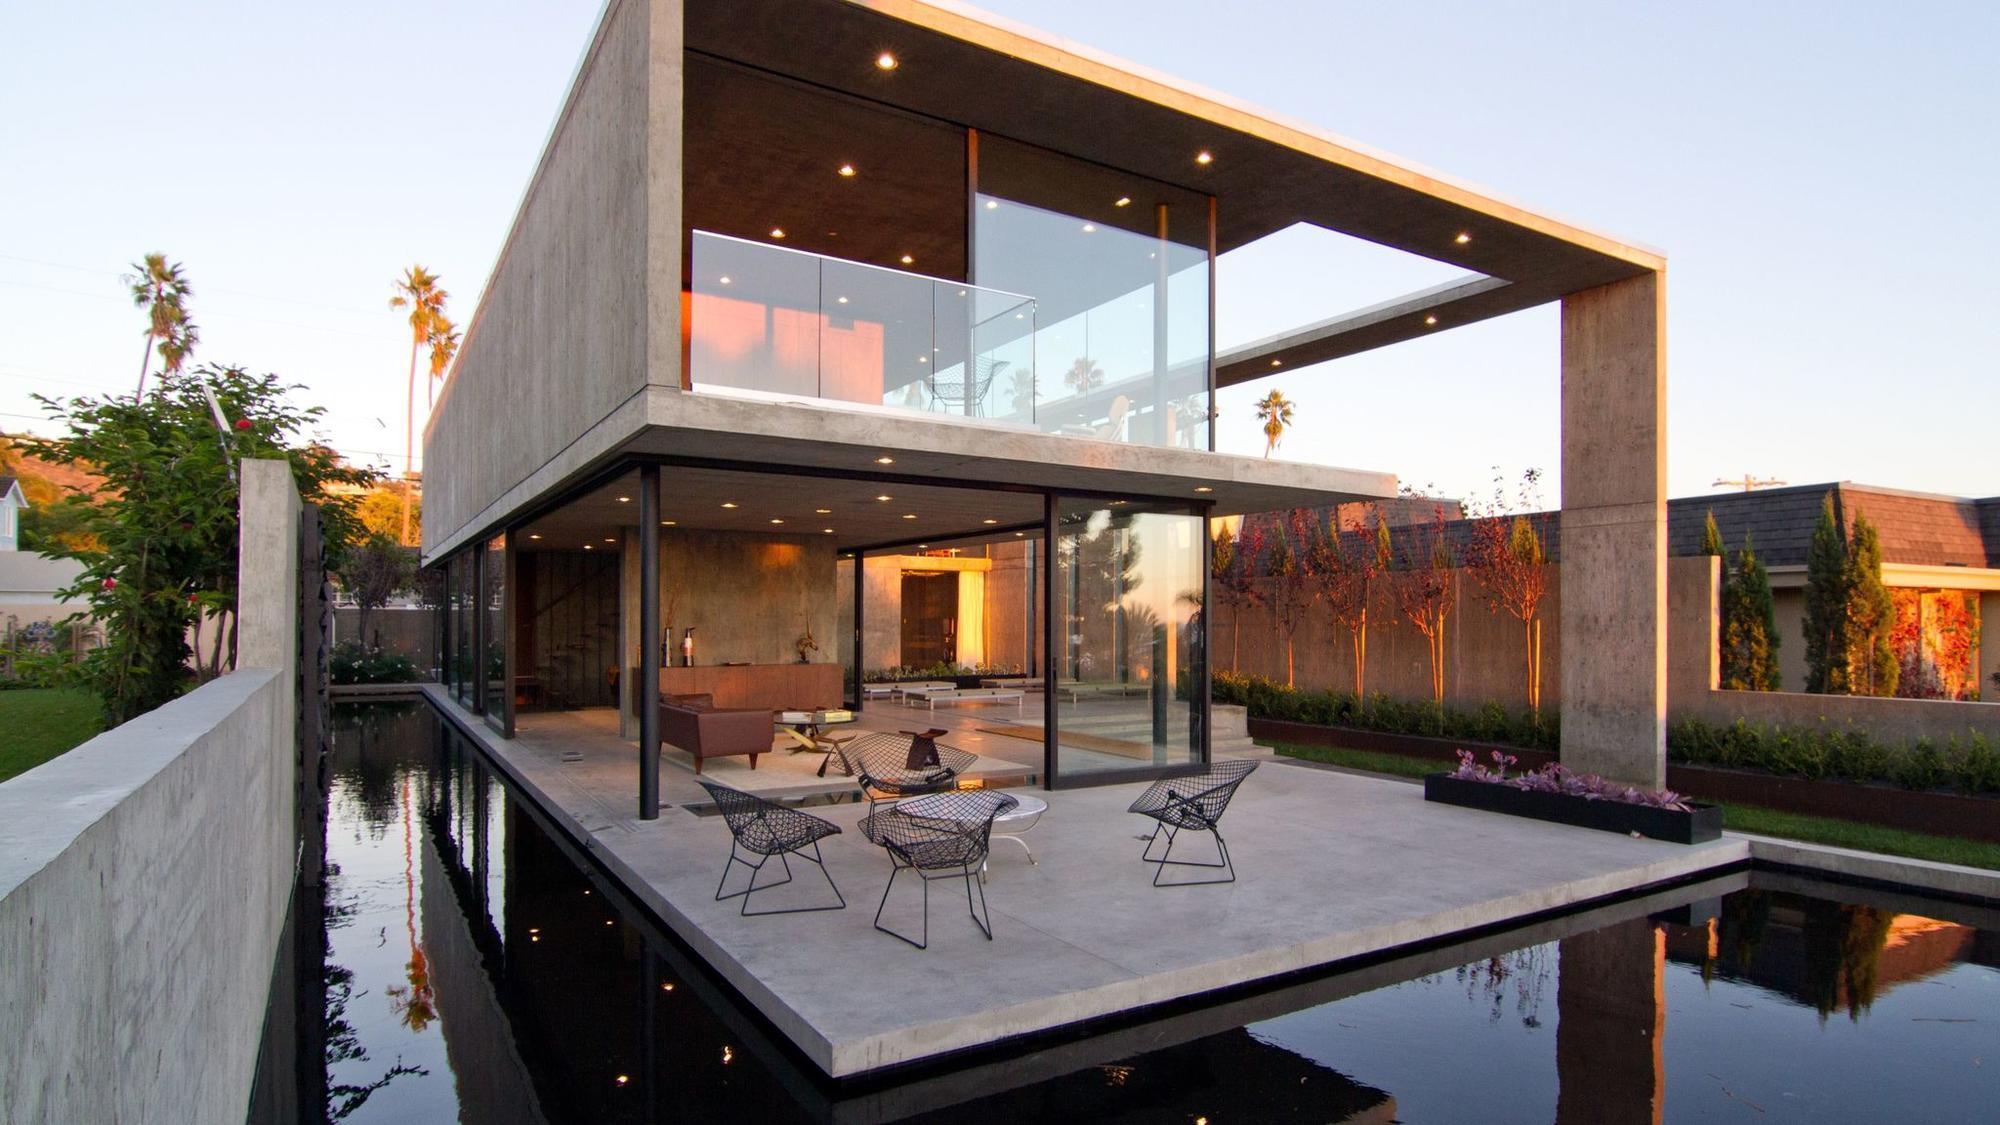 Floating' concrete house wins top architecture award - The San Diego ...